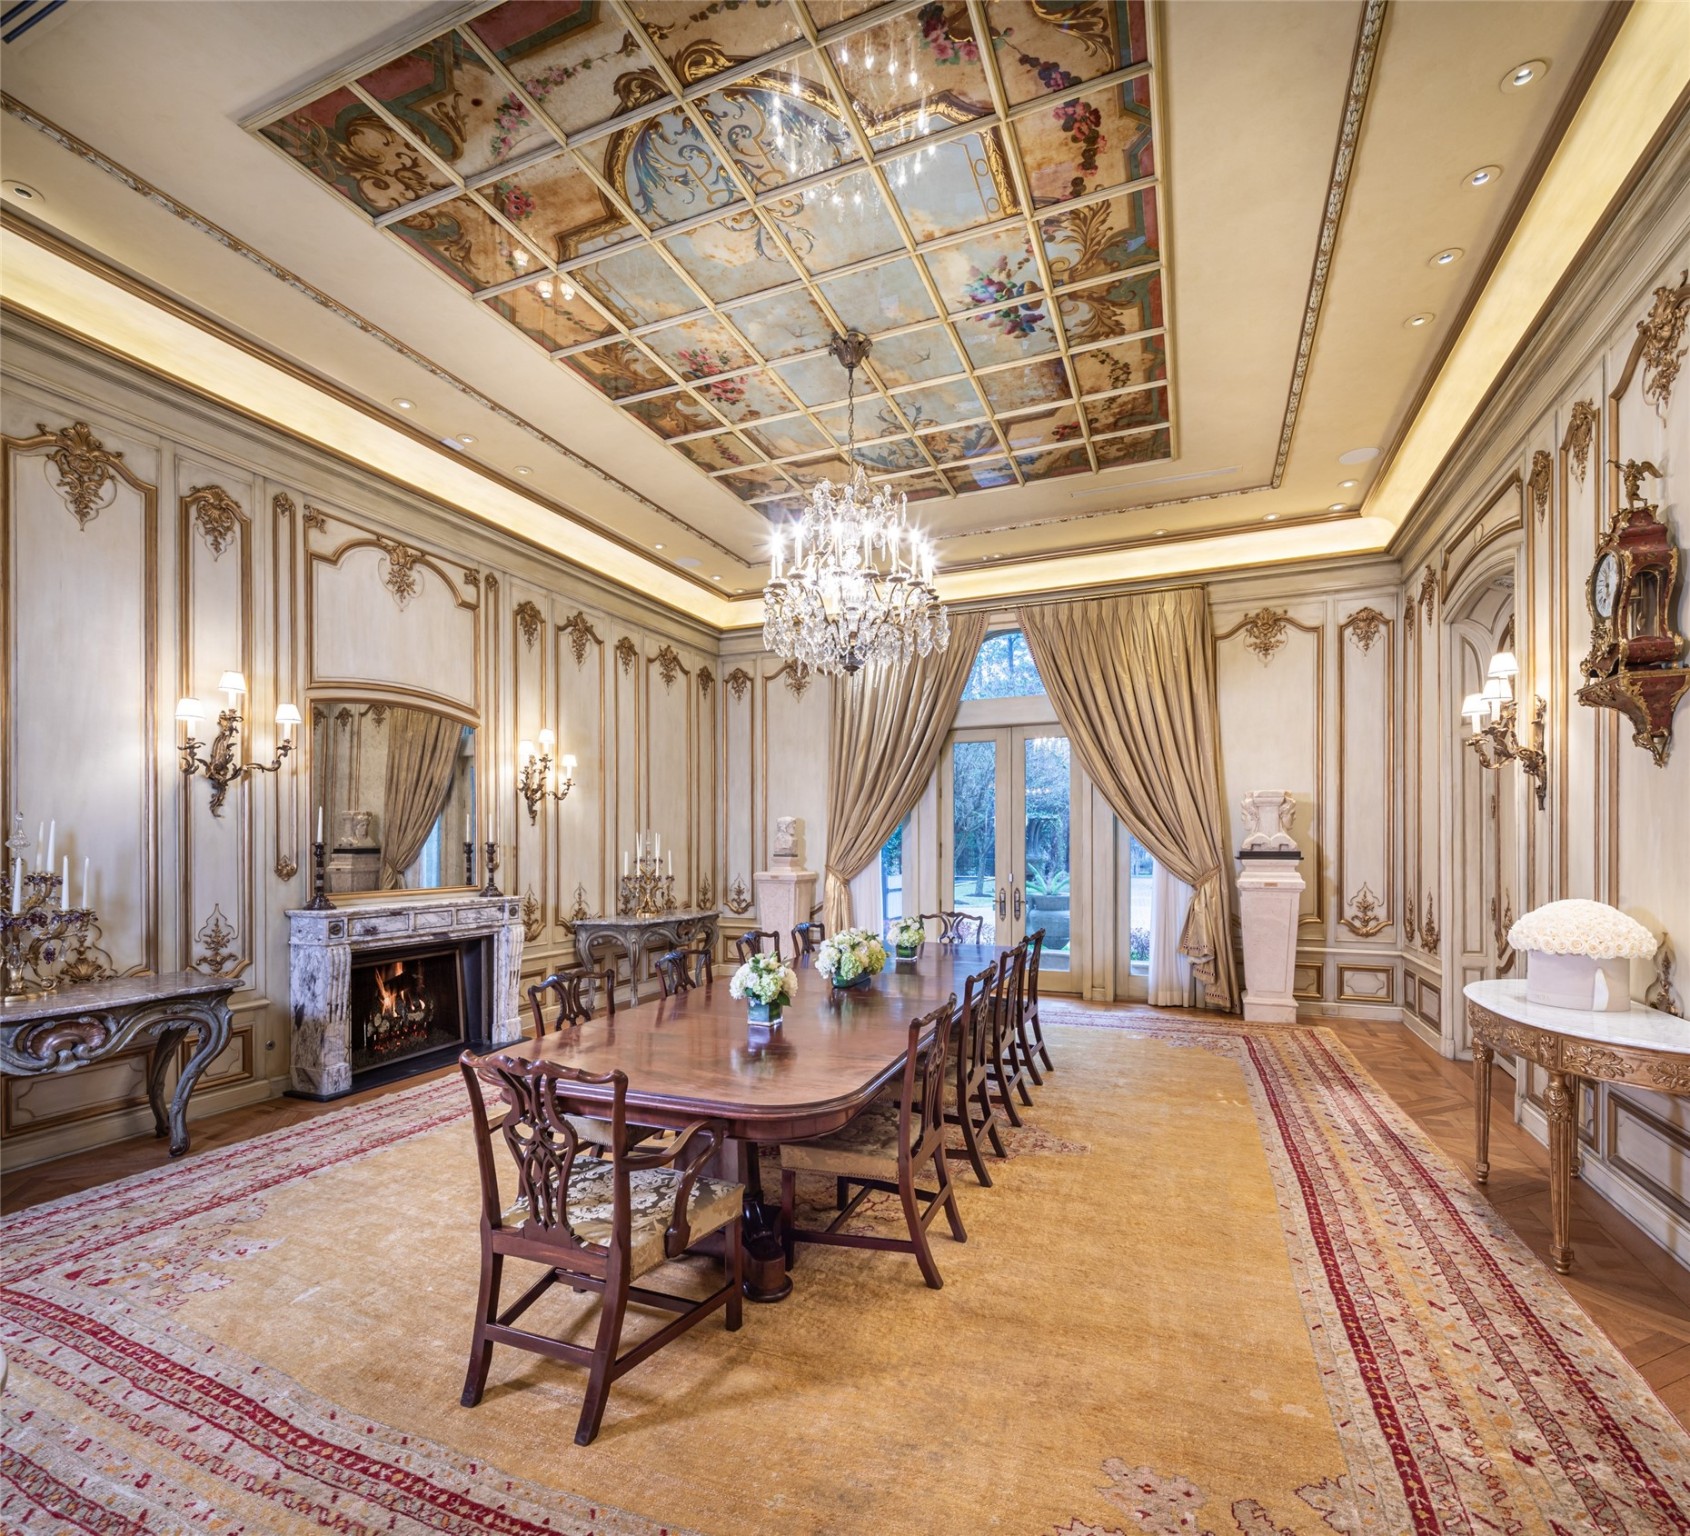 Guests will be amazed as they enter the Formal Dining Room with 14' custom ceiling of antique hand-painted canvas panels imported from Europe, overlaid with glass and bound within a custom carved wood border accented by metallic glazed reed and ribbon garland.